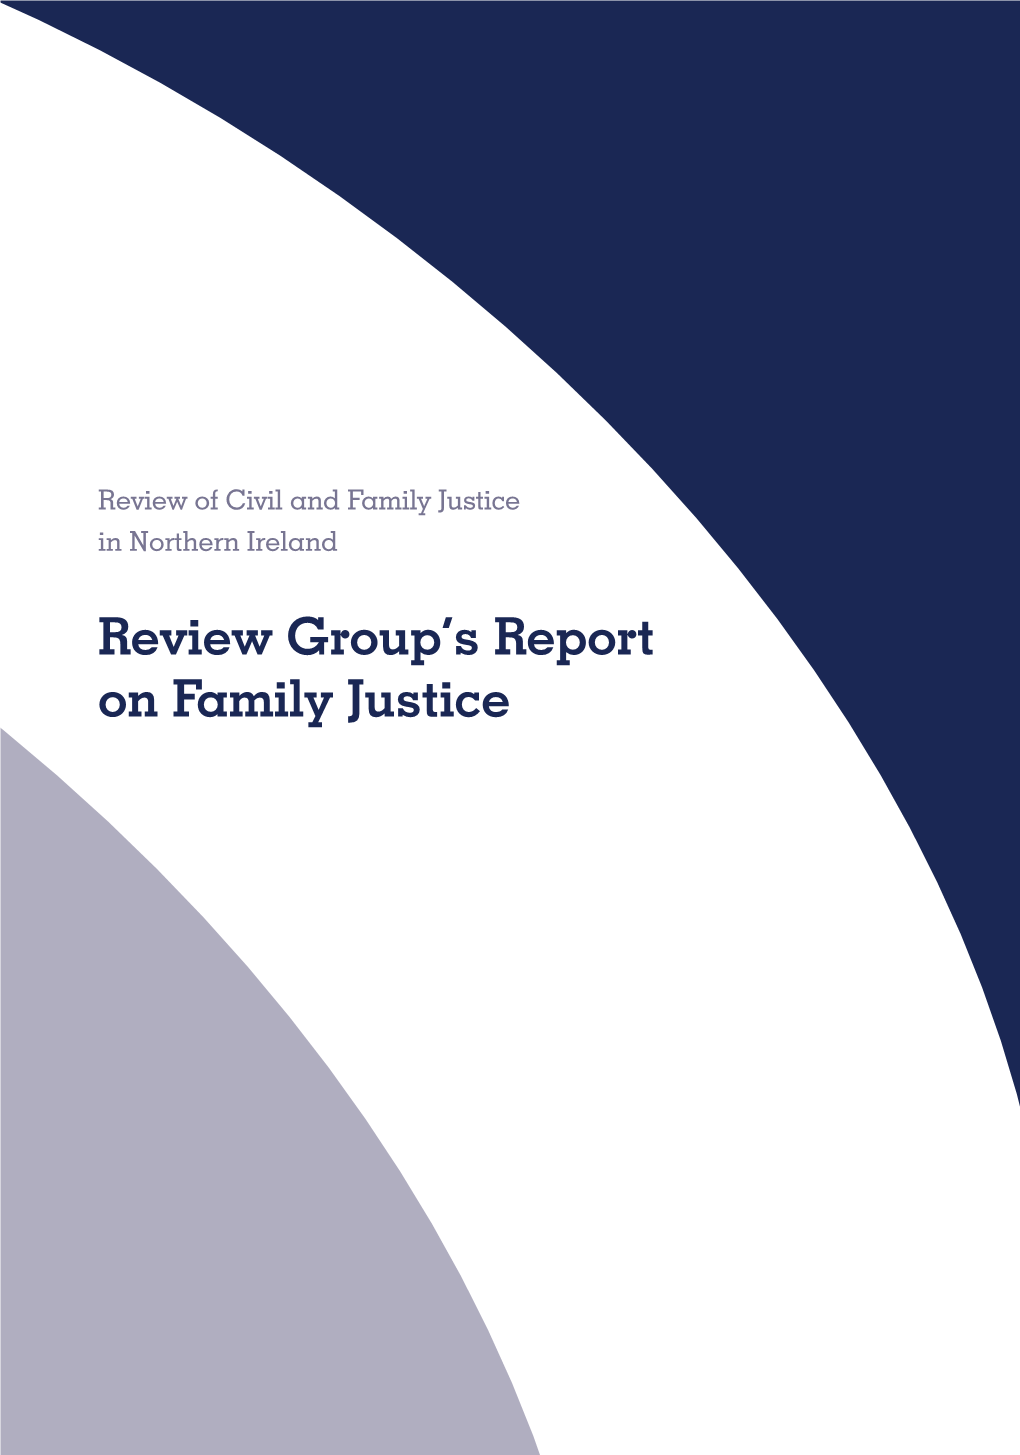 Review Group's Report on Family Justice